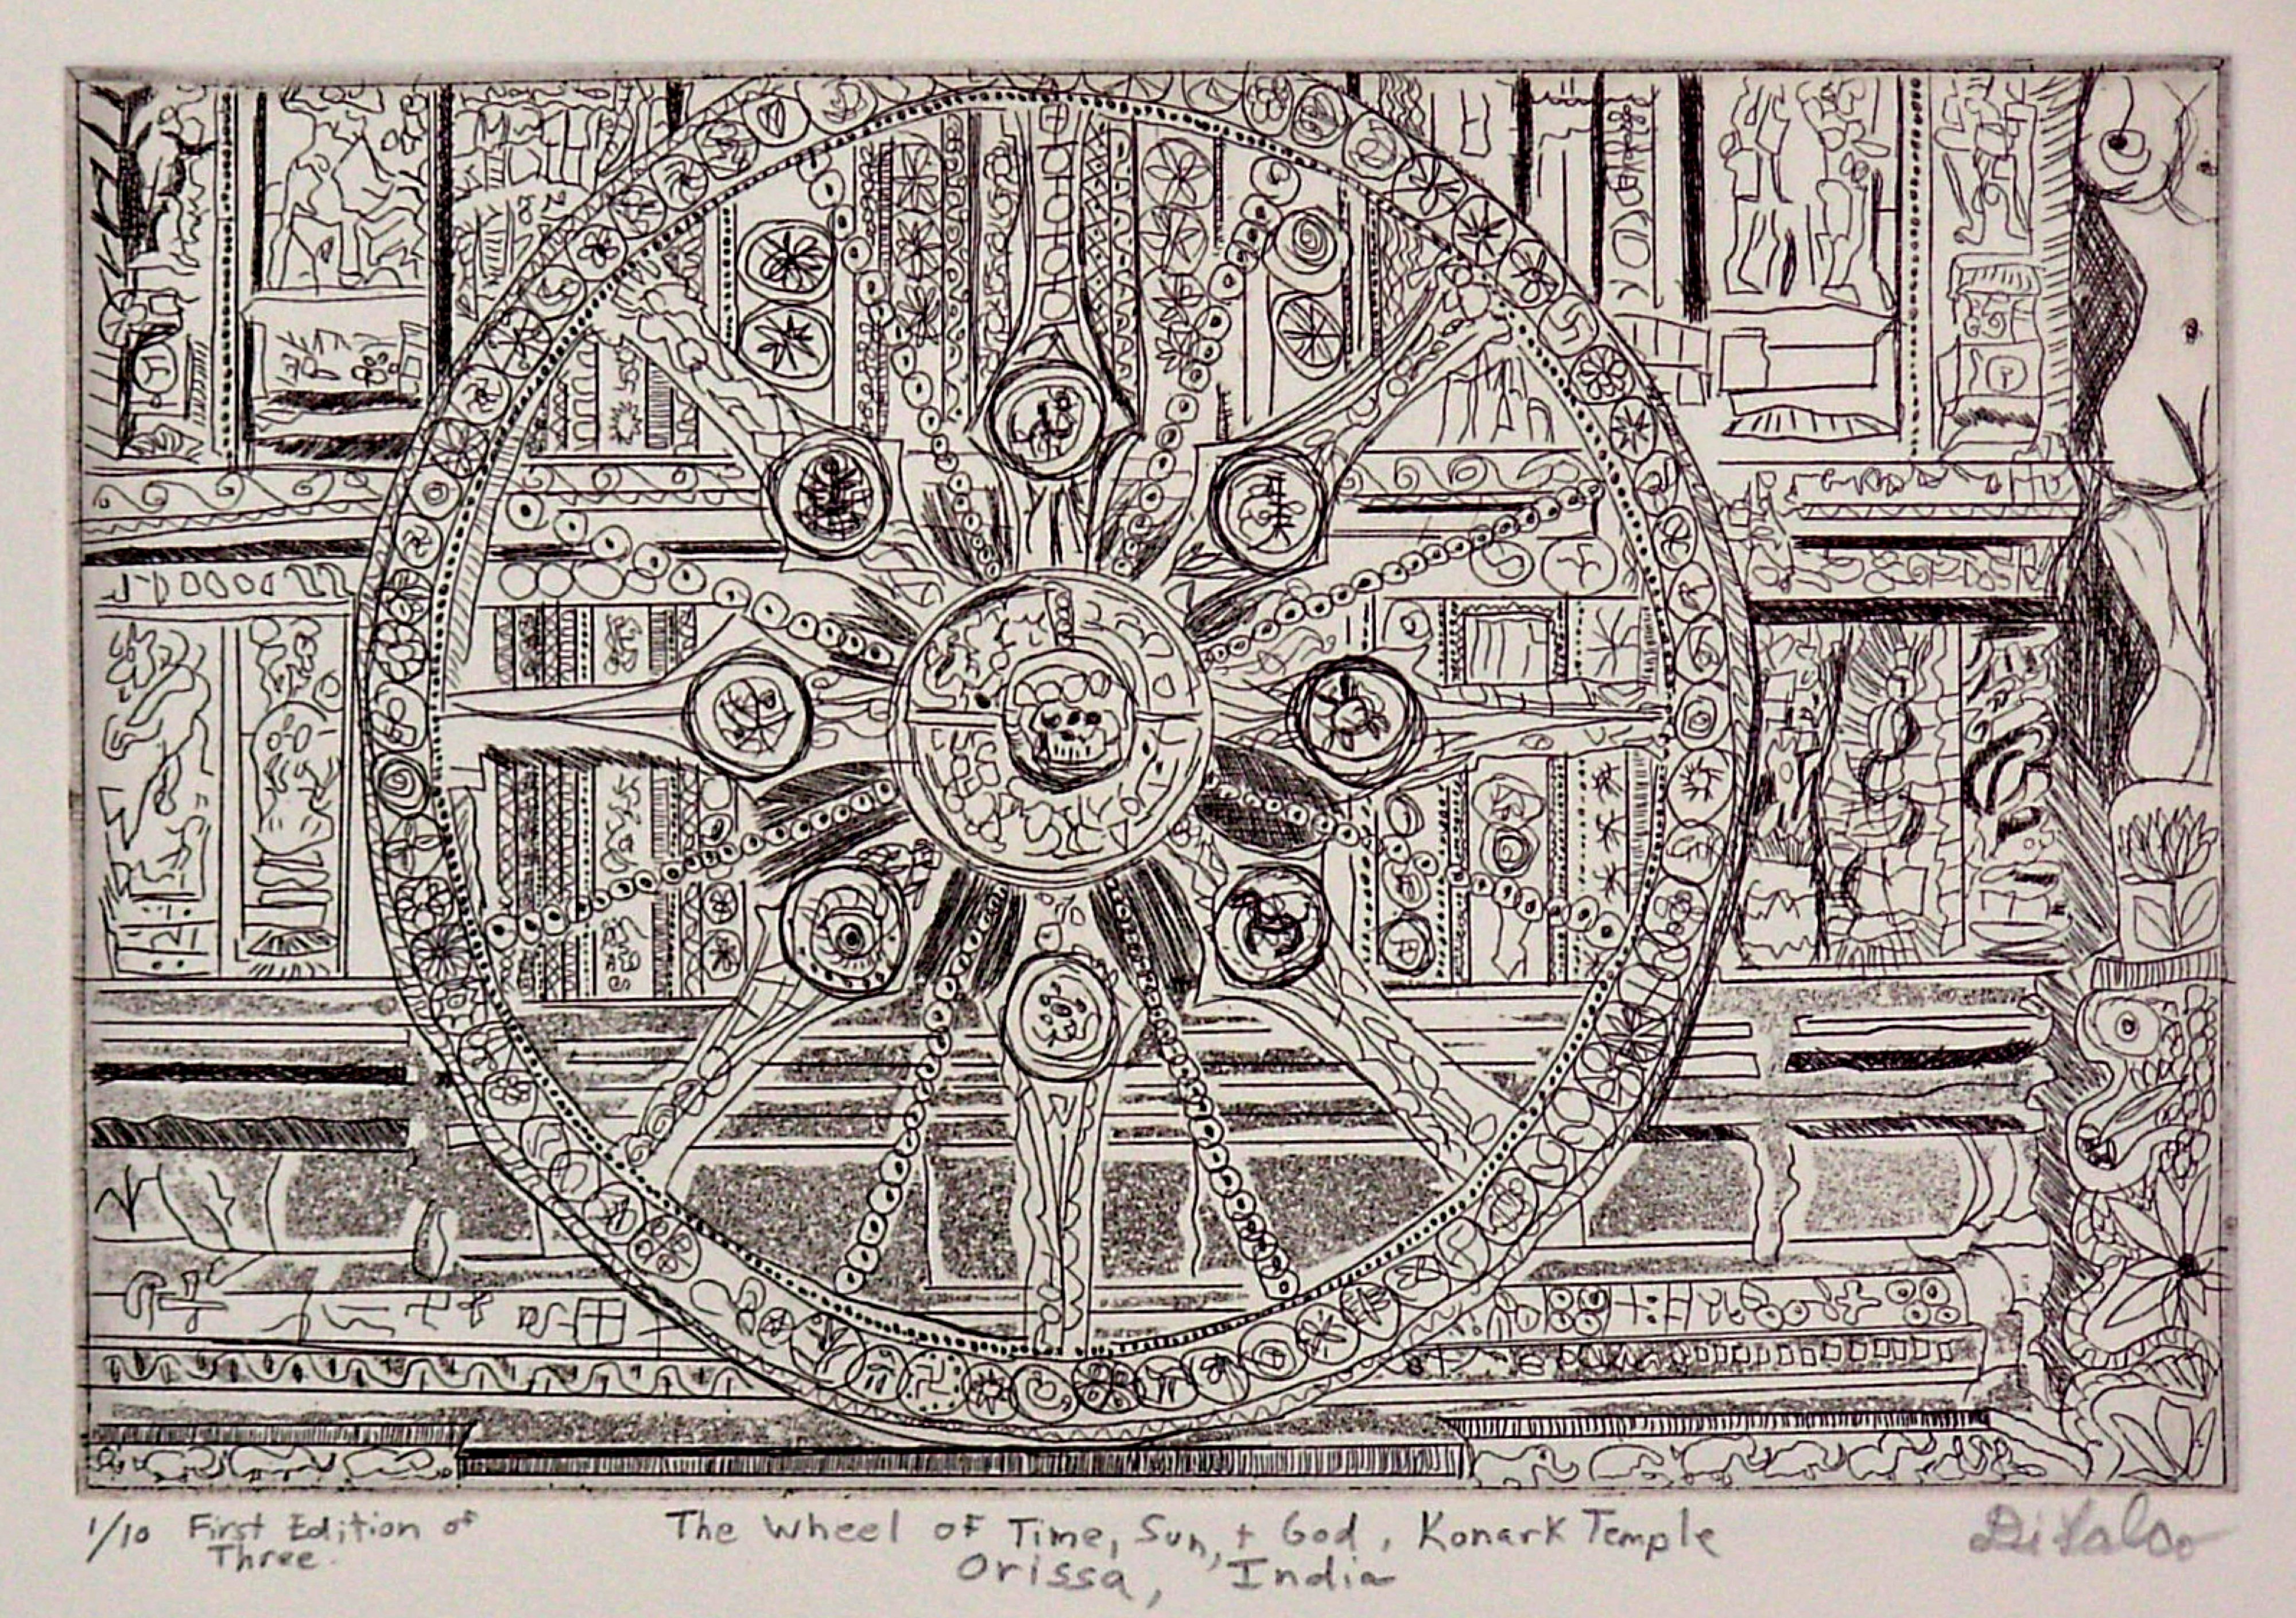 Jerry  Di Falco: 'KONARK TEMPLE IN ORISSA INDIA', 2010 Etching, Hindu. title is, THE WHEEL OF TIME SUN AND GOD AT KONARK TEMPLE IN ORISSA INDIA. The etching techniques included intaglio and aquatint. I hand printed and published this edition at The Center for Works on Paper in Philadelphia, Pennsylvania, USA. Please note that this etching is shipped to the collector ...